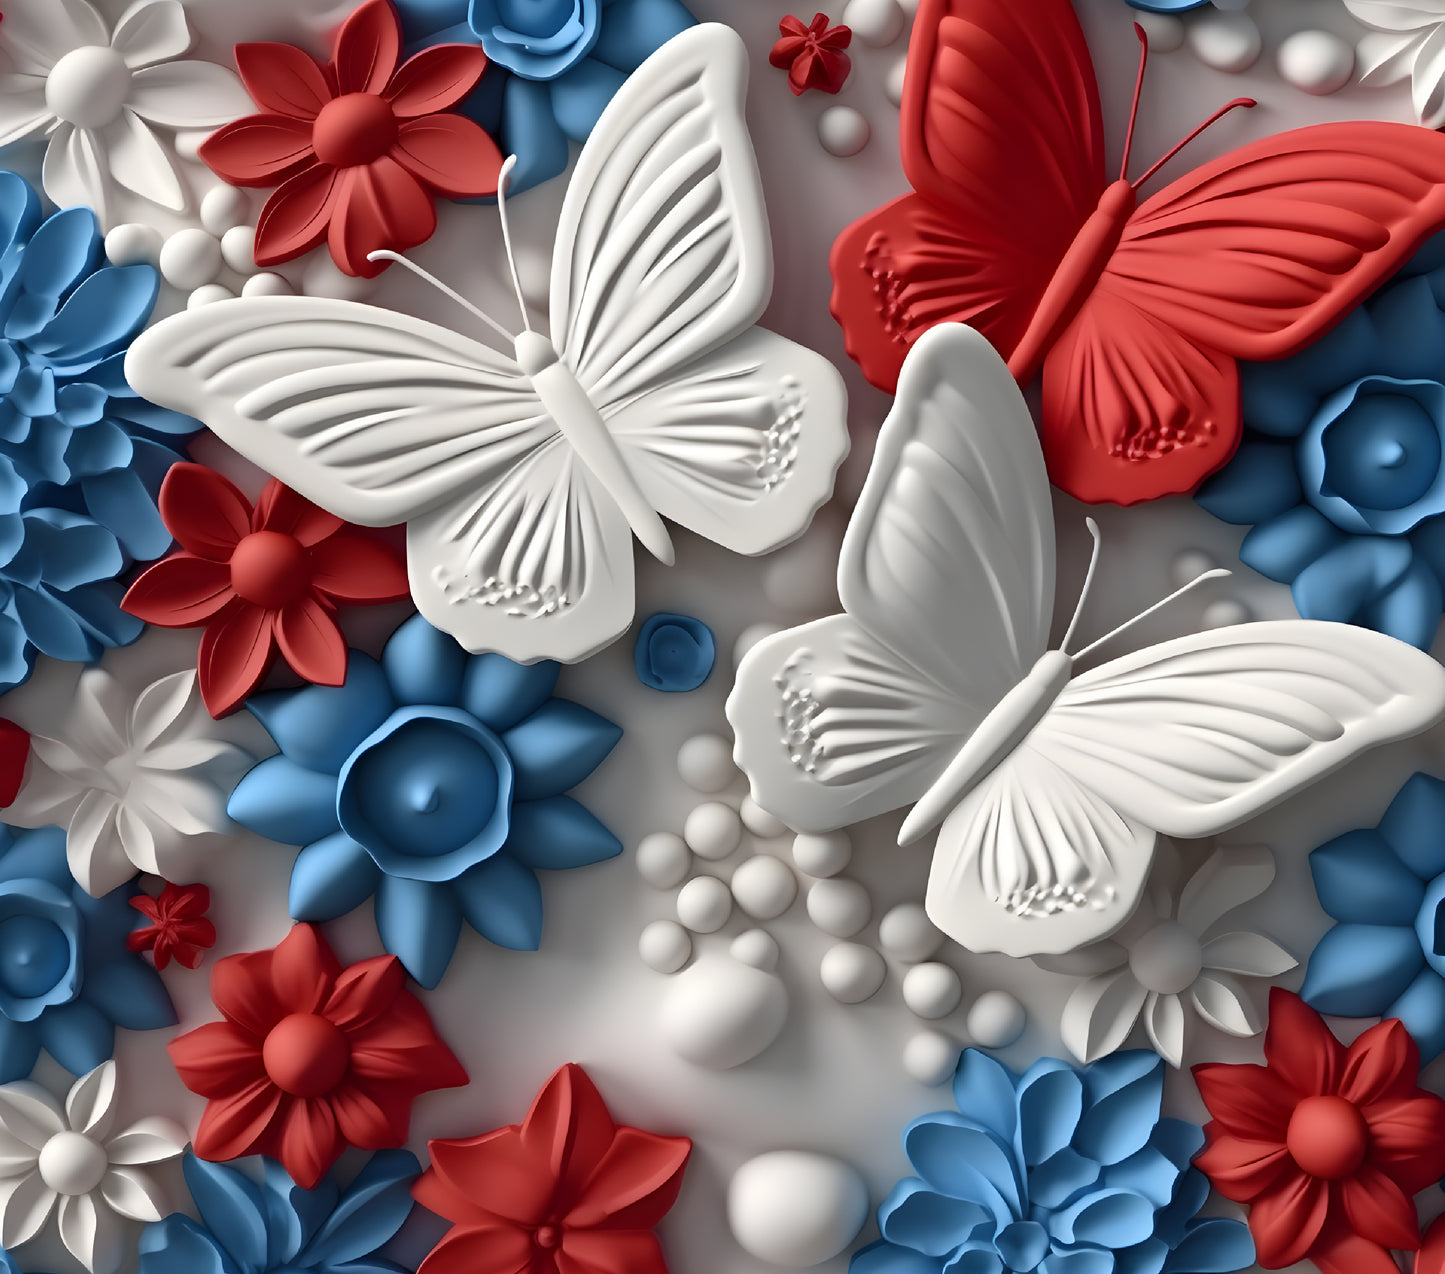 3D PATRIOTIC BUTTERFLY